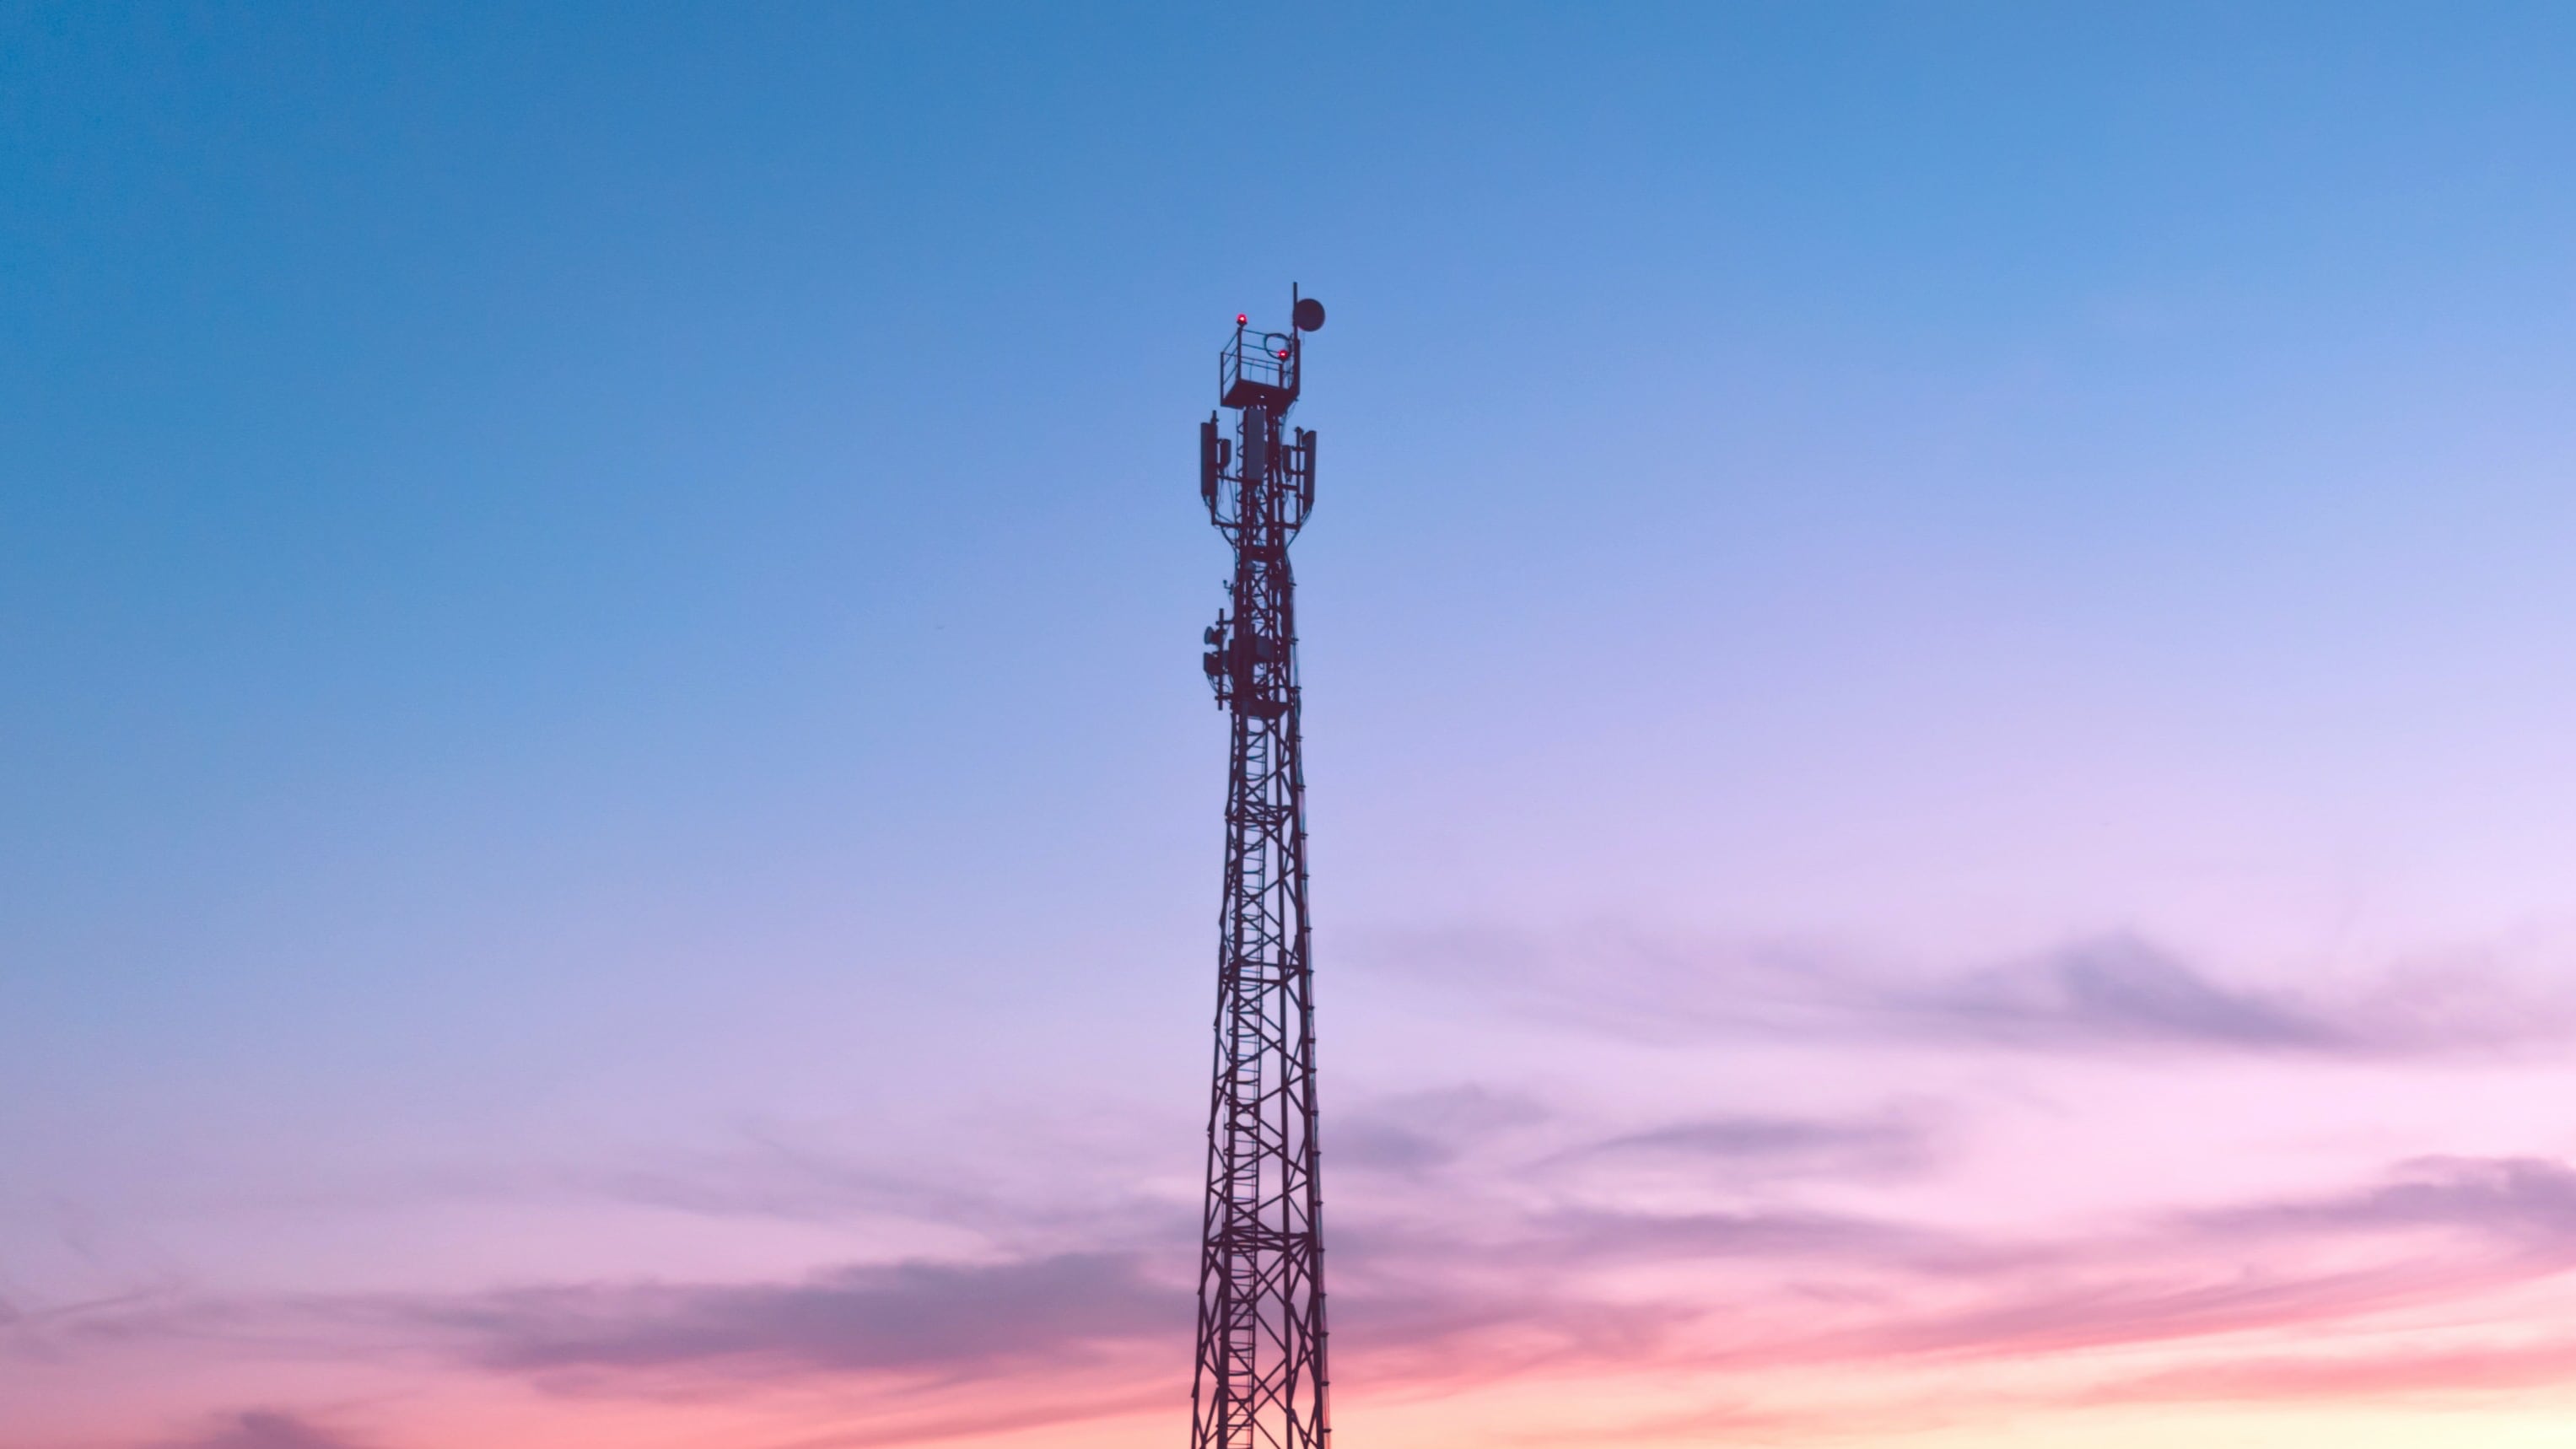 A cellular tower at dusk